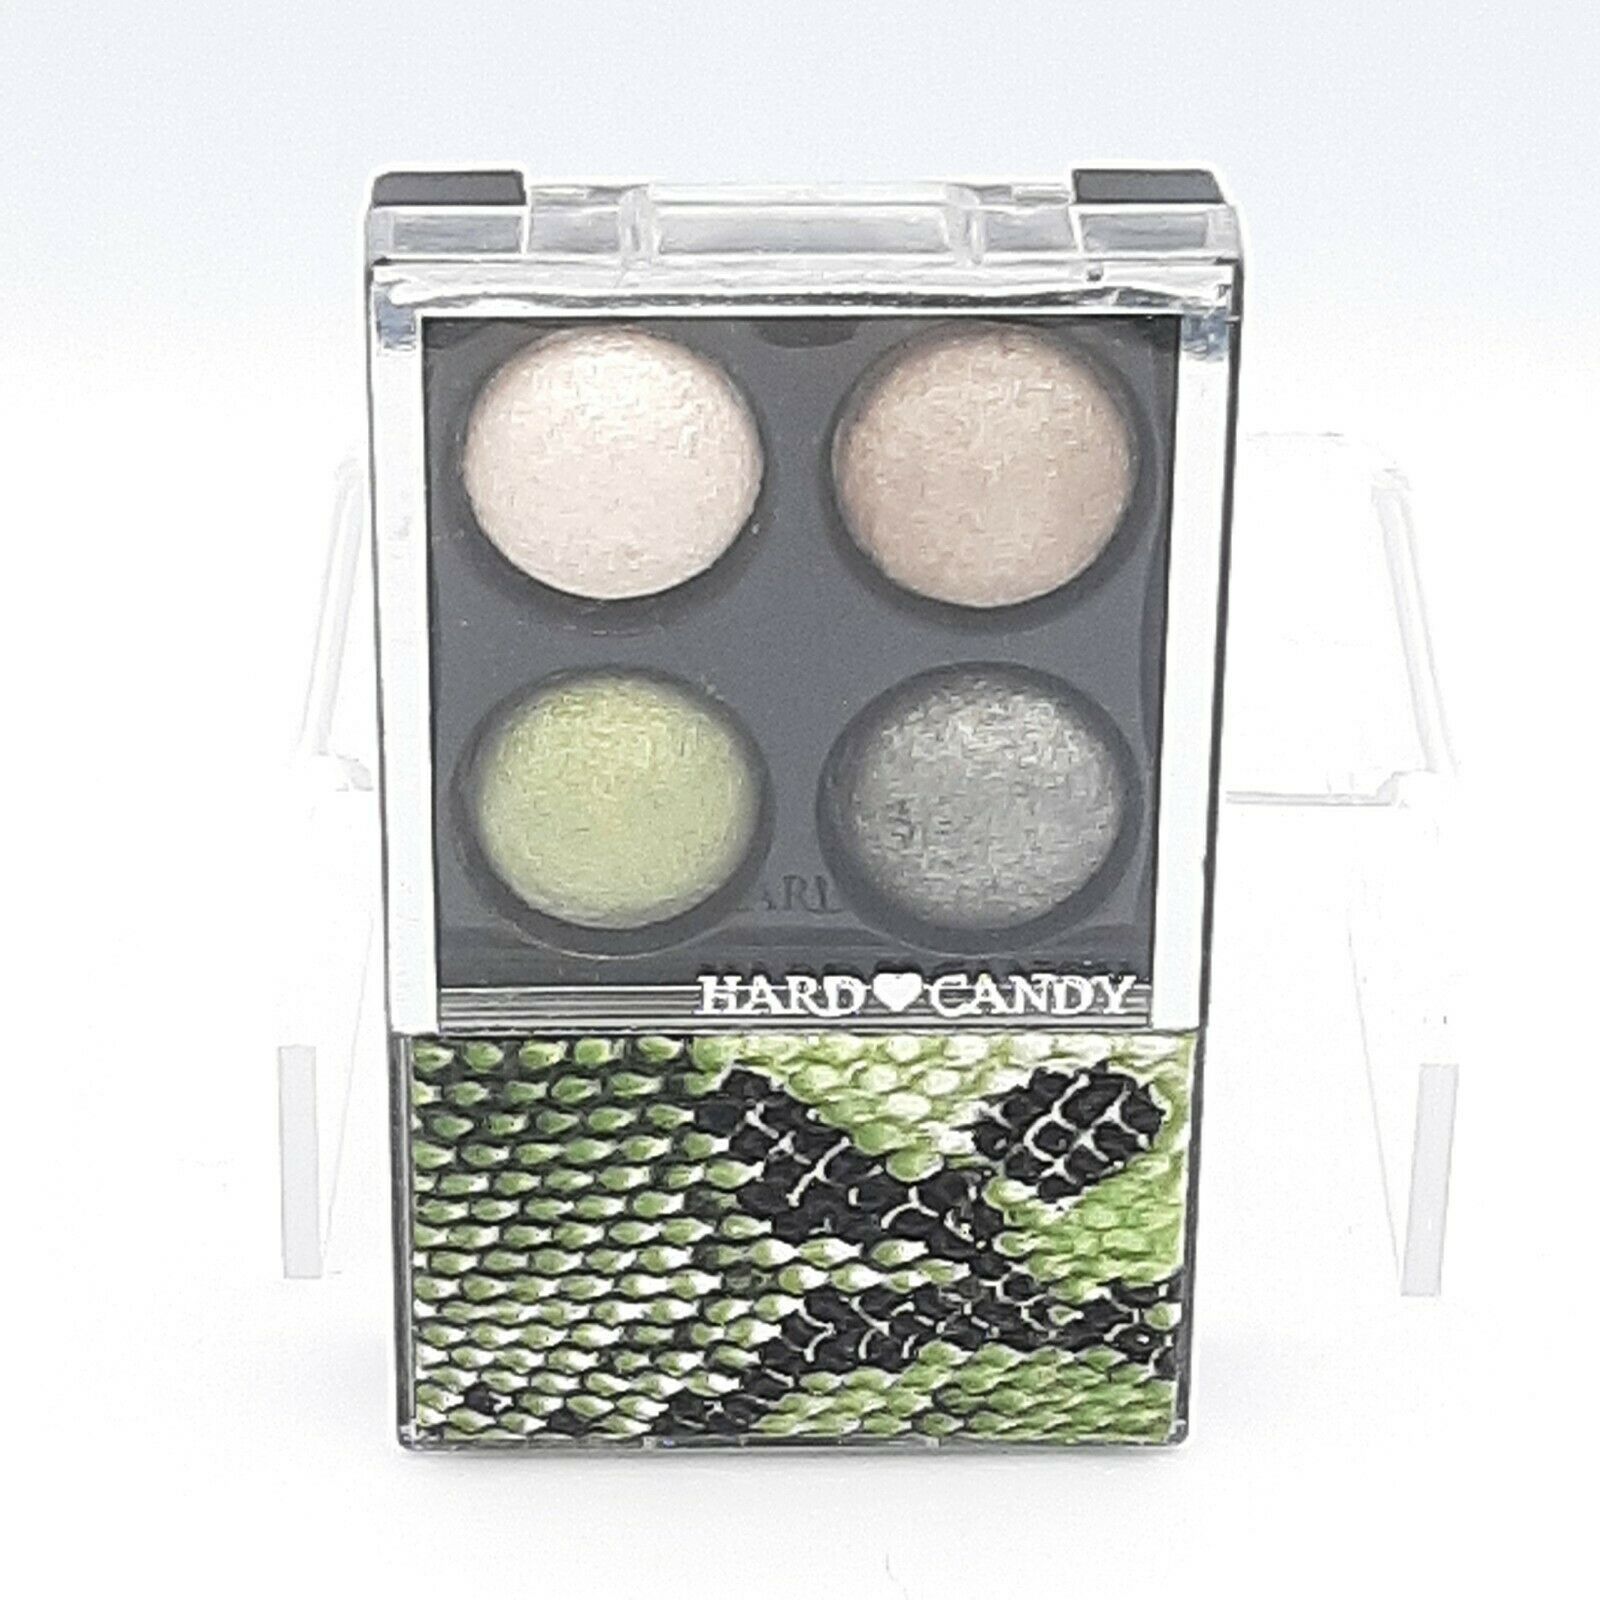 Primary image for Hard Candy Mod Quad Baked Eyeshadow, 722 Ivy League